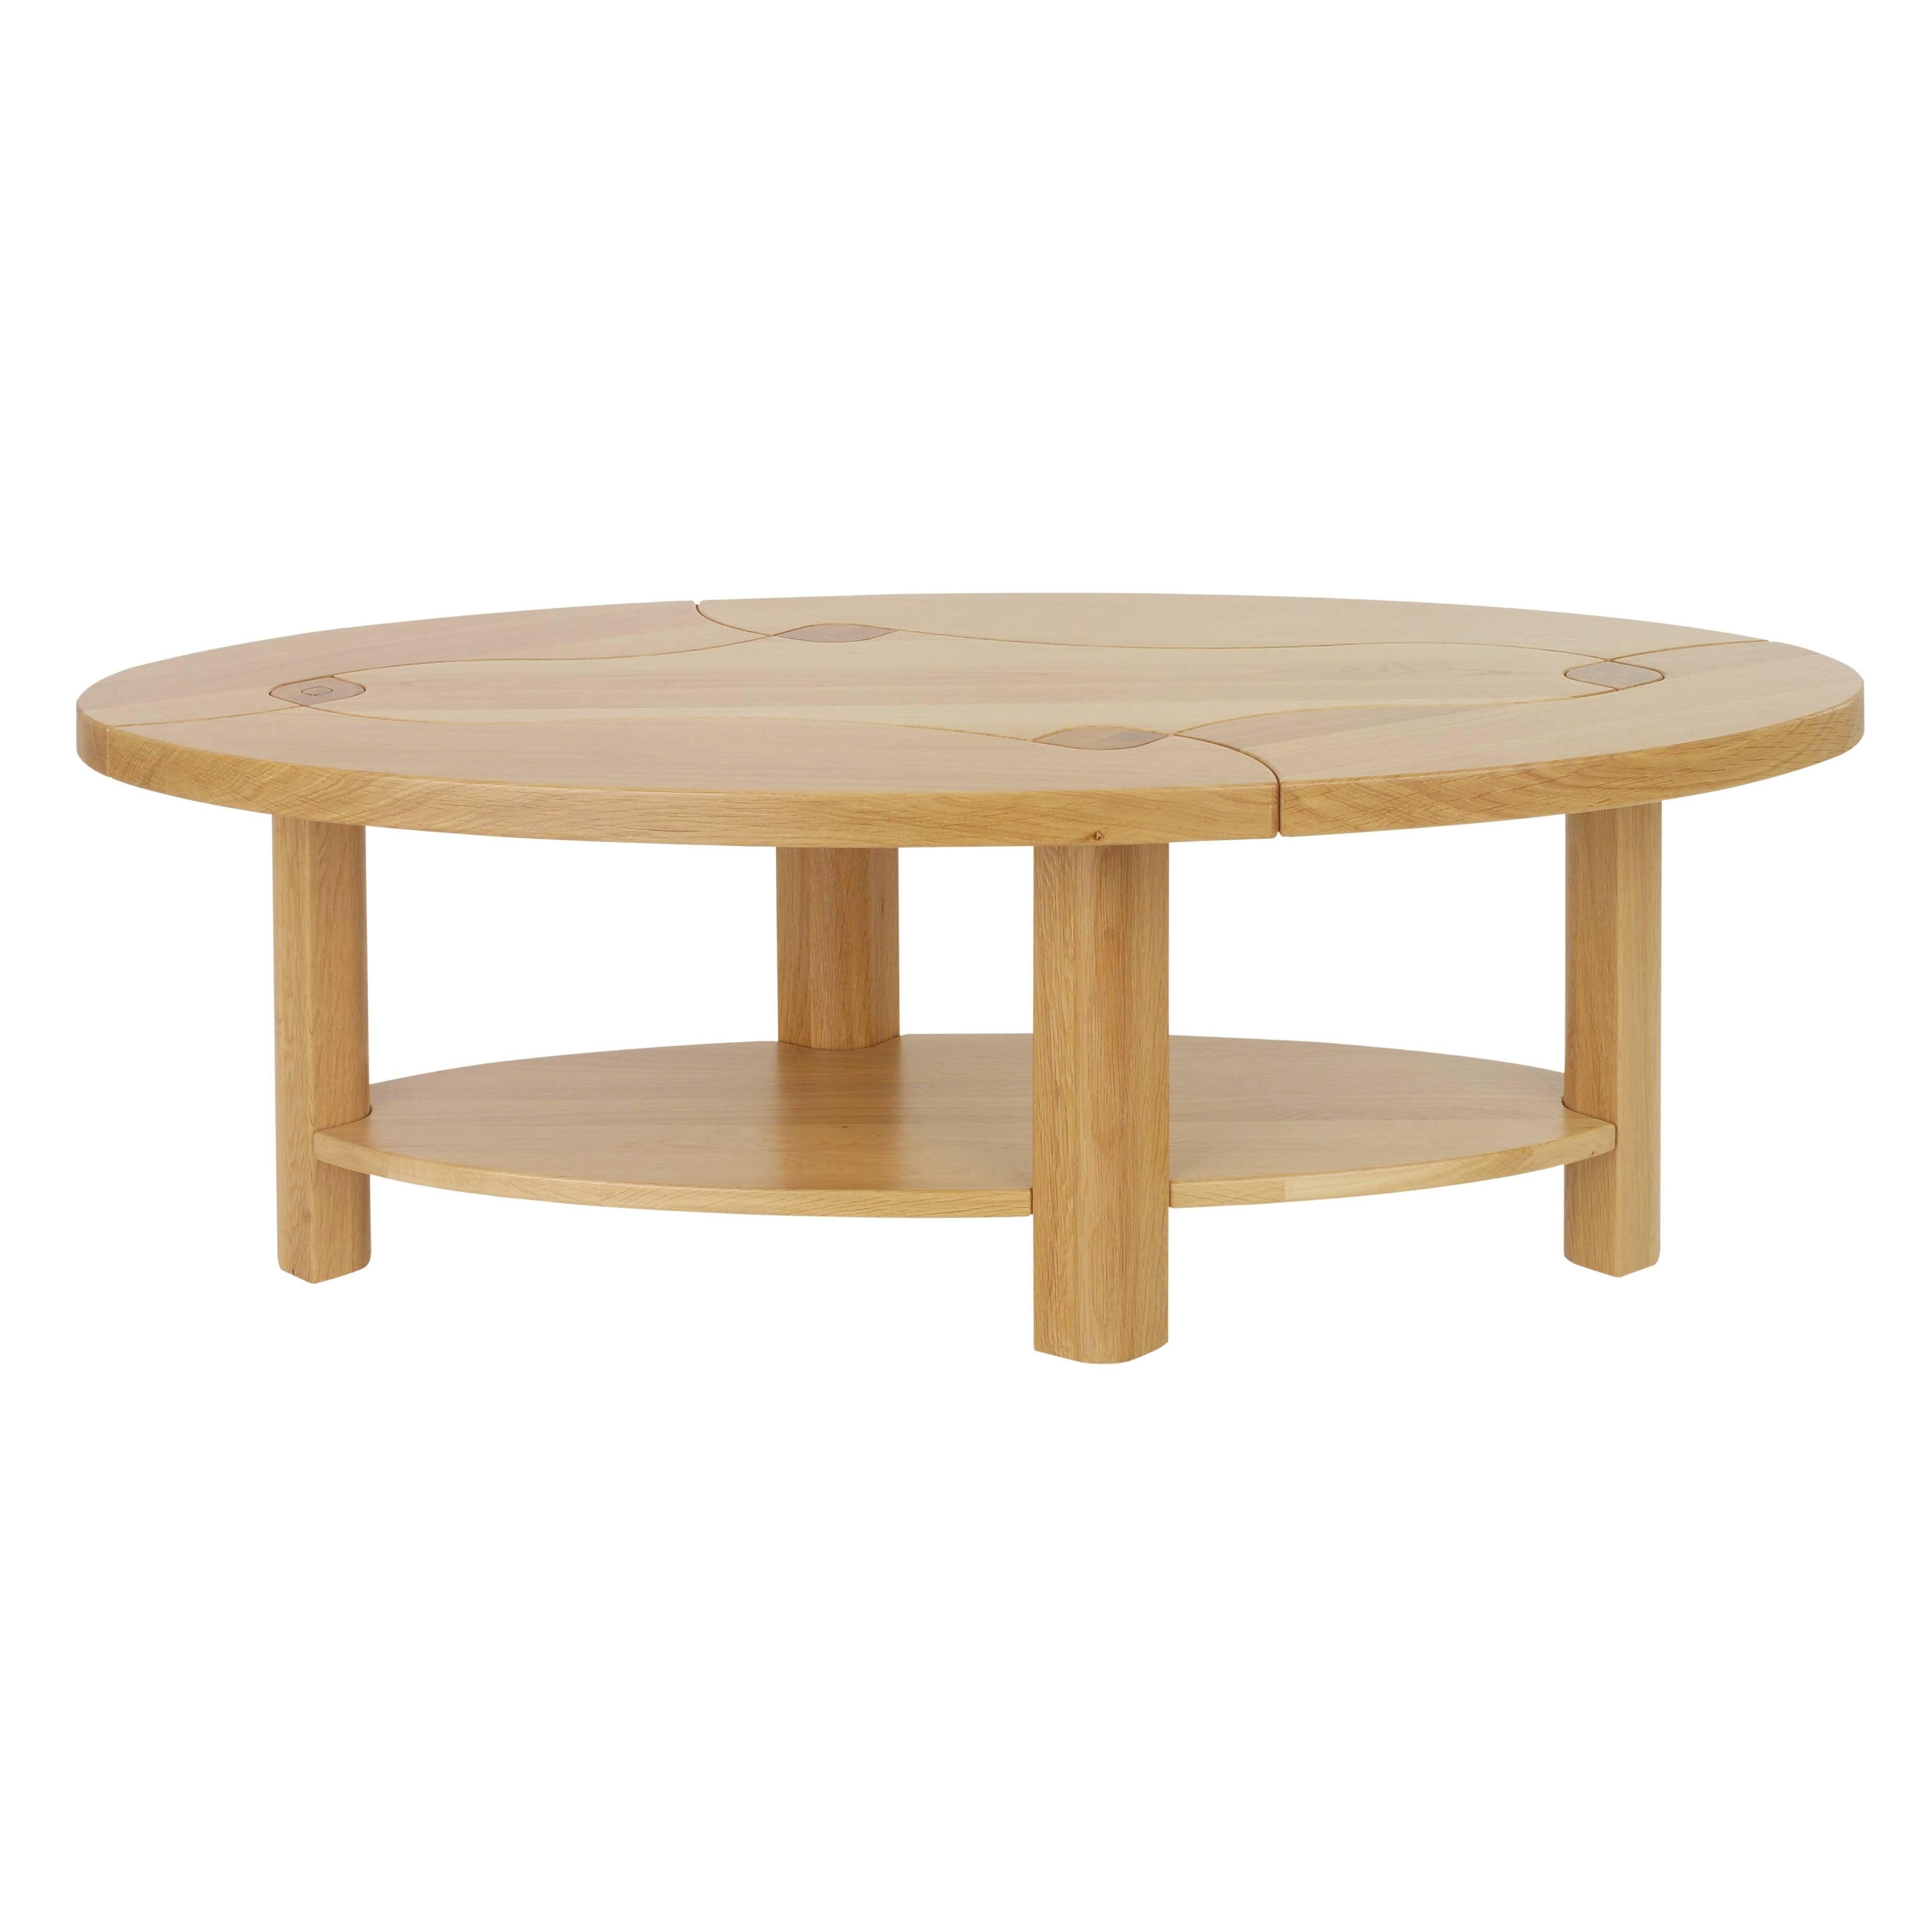 Furniture: Creative Minimalist Small Oval Coffee Table For Living Throughout Oval Wood Coffee Tables (View 29 of 30)